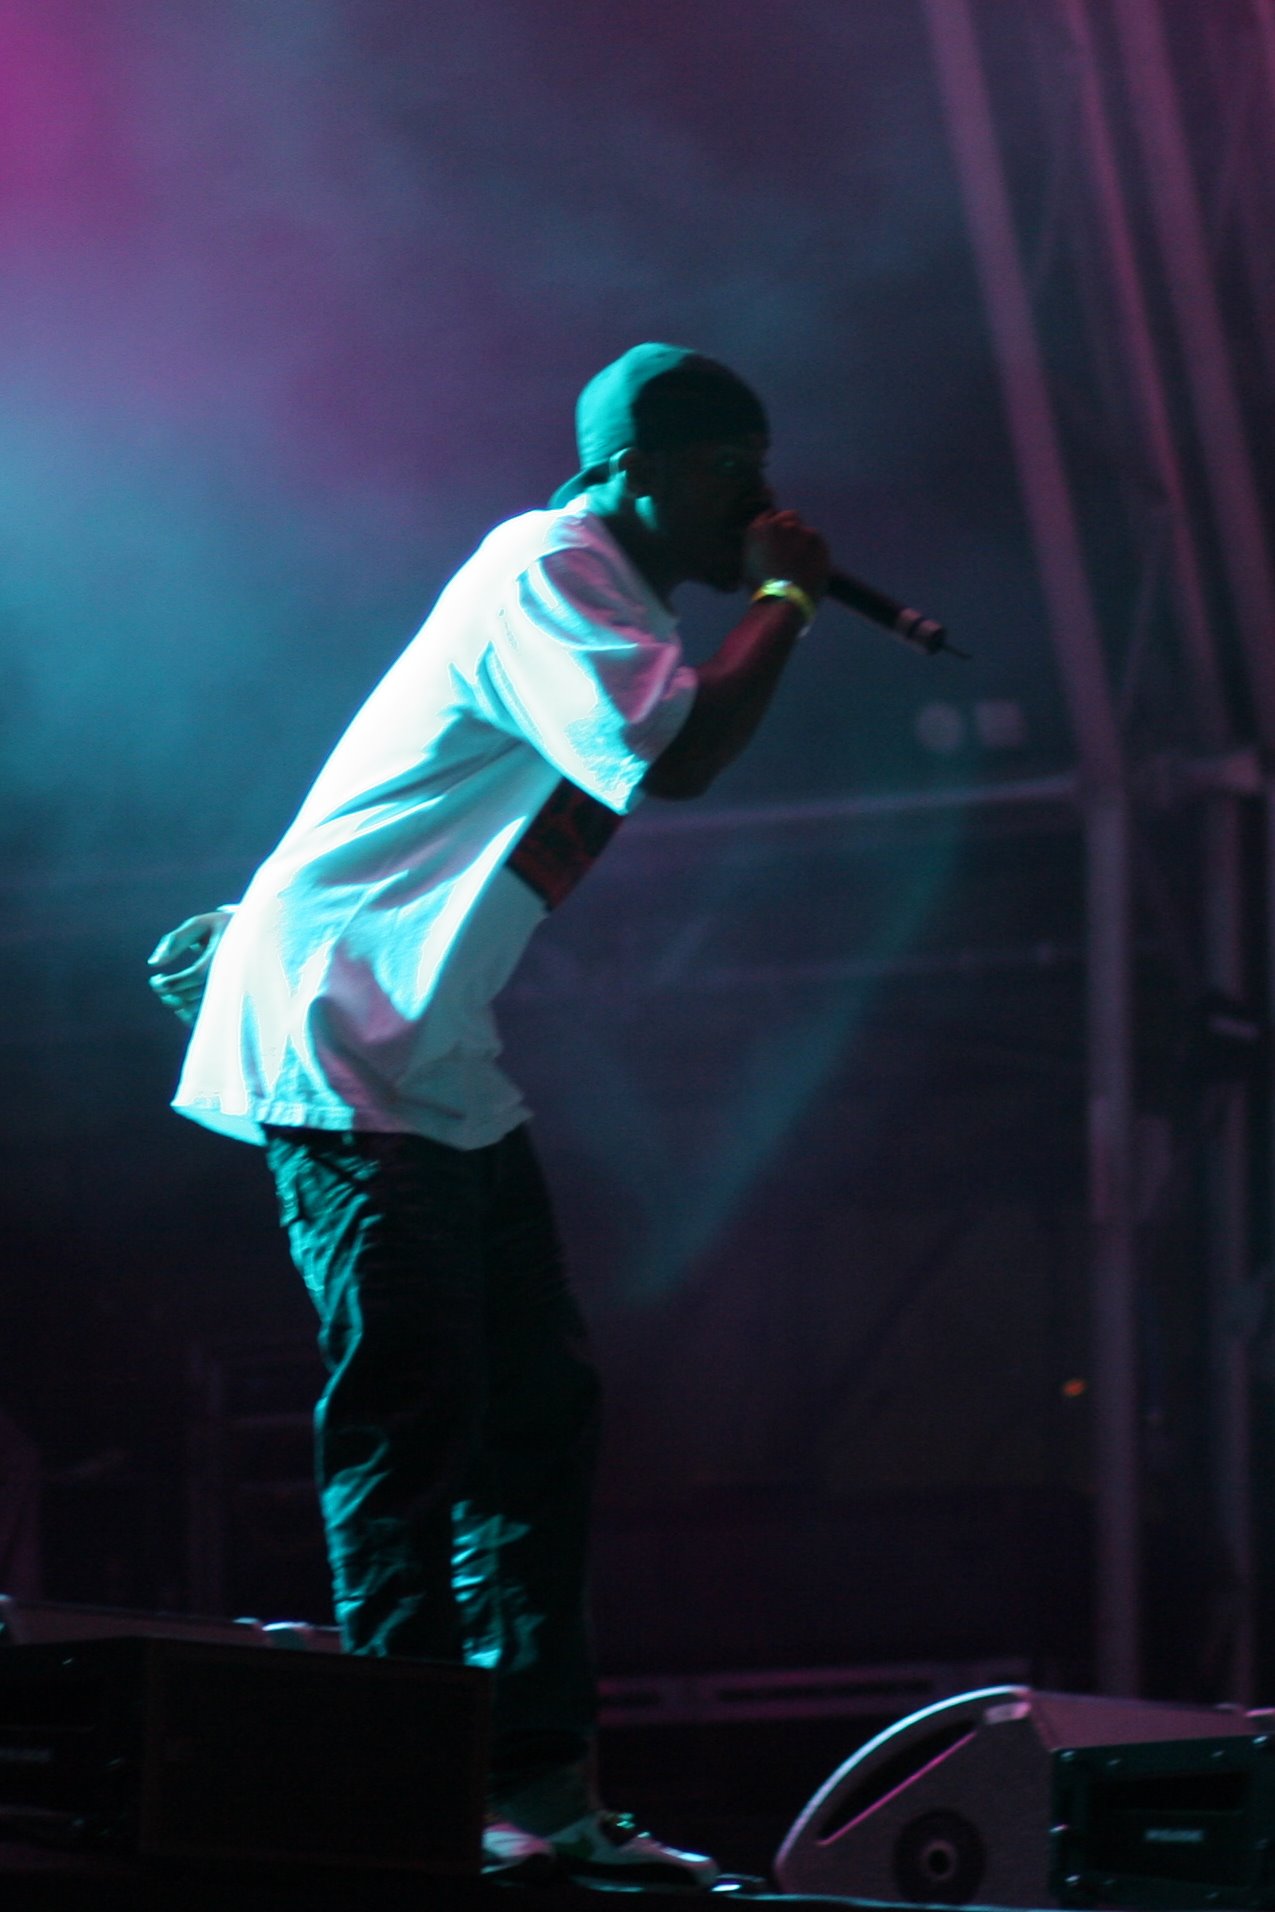 the rapper performs on stage with blue lights